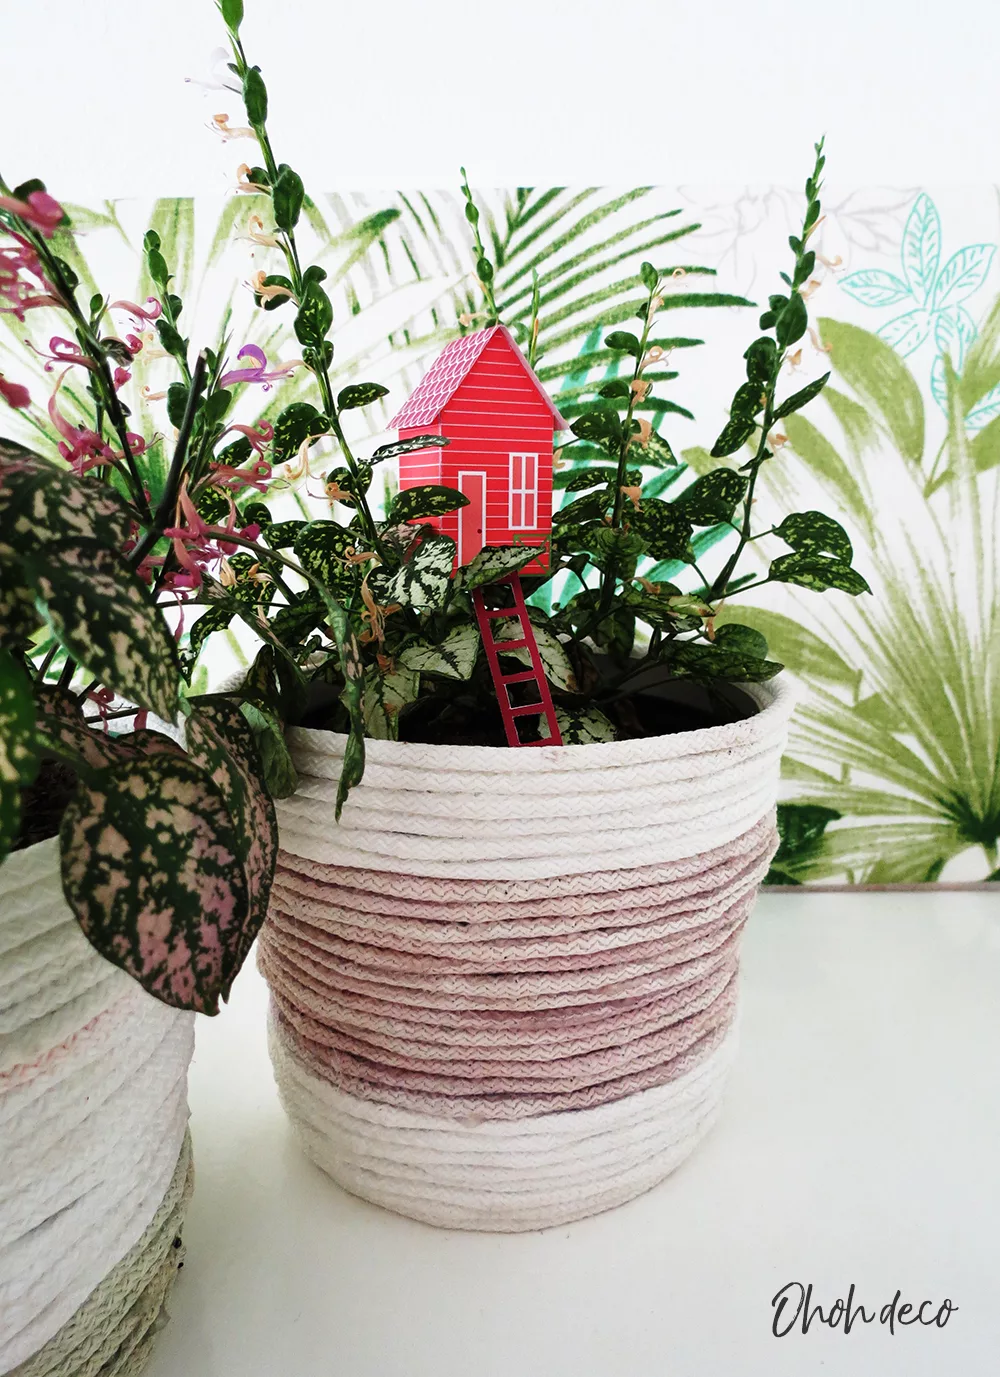 place the paper house template in a planter